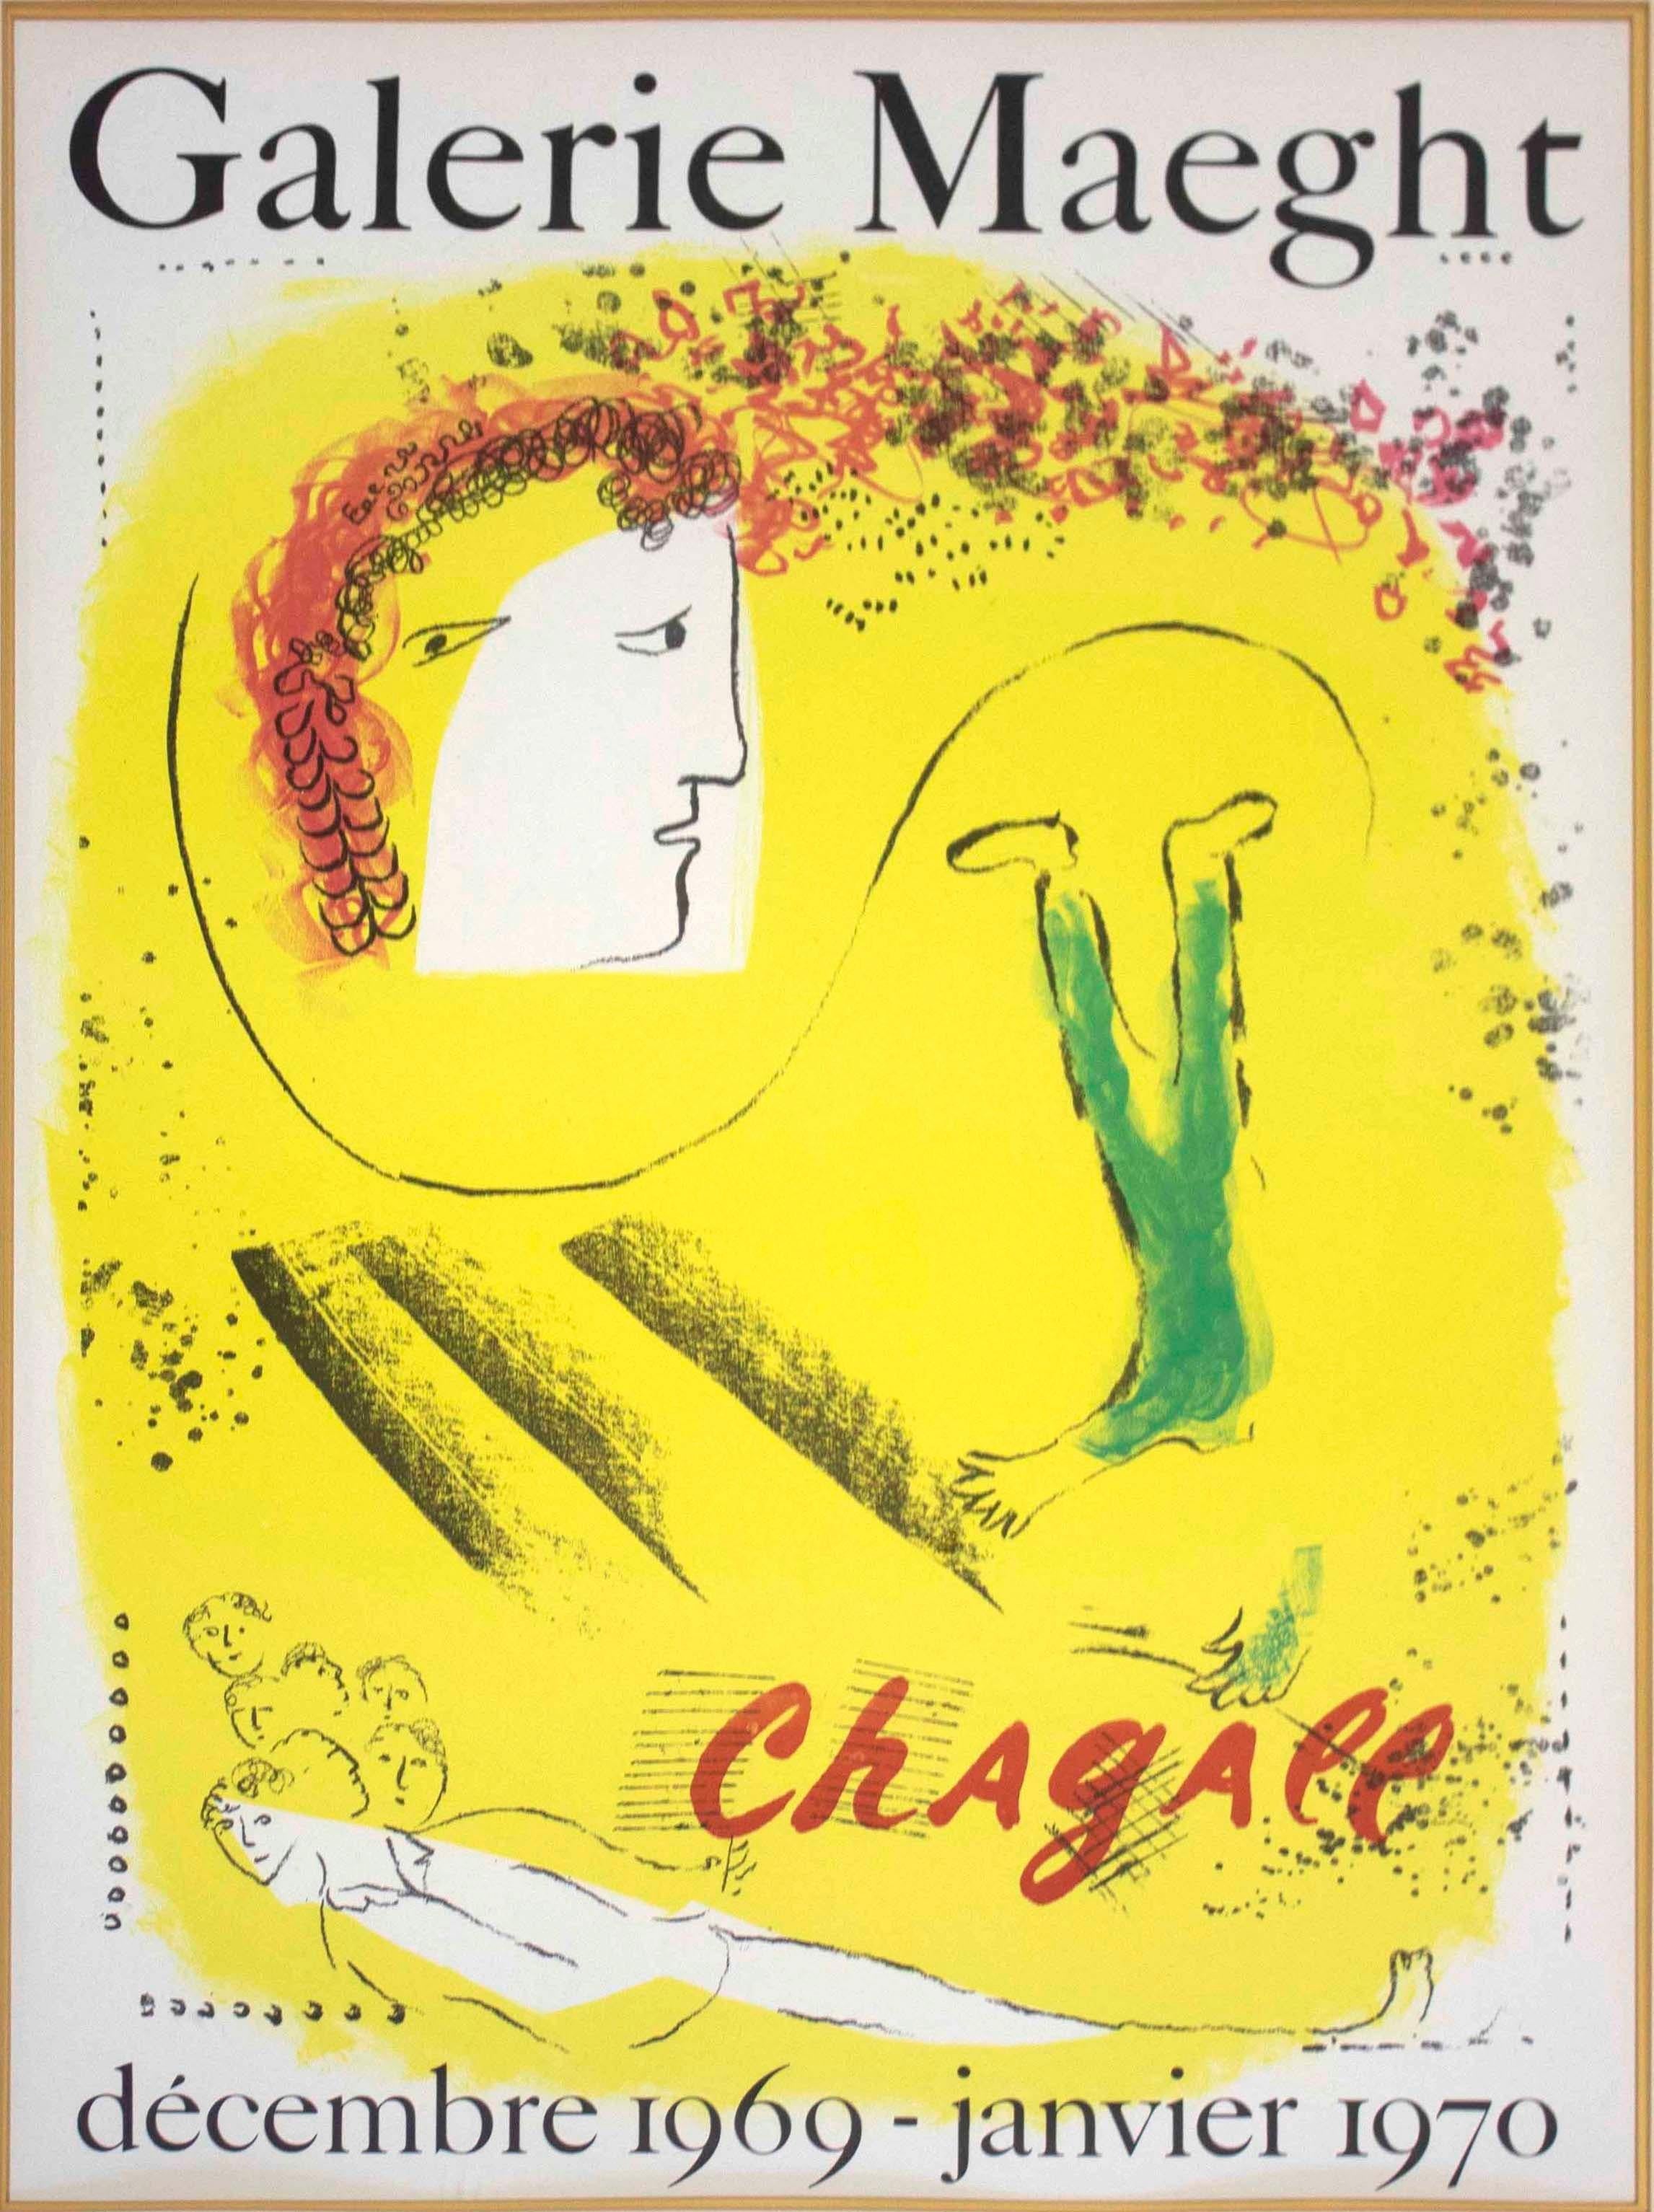 A whimsical vintage Marc Chagall vintage exhibition poster created for an exhibition at Galerie Maeght, Paris 1969. Edition size 3000 and printed by Moulot, Paris. Dimensions: 36.5H x 27.25W (framed). In excellent vintage condition. 

Marc Chagall